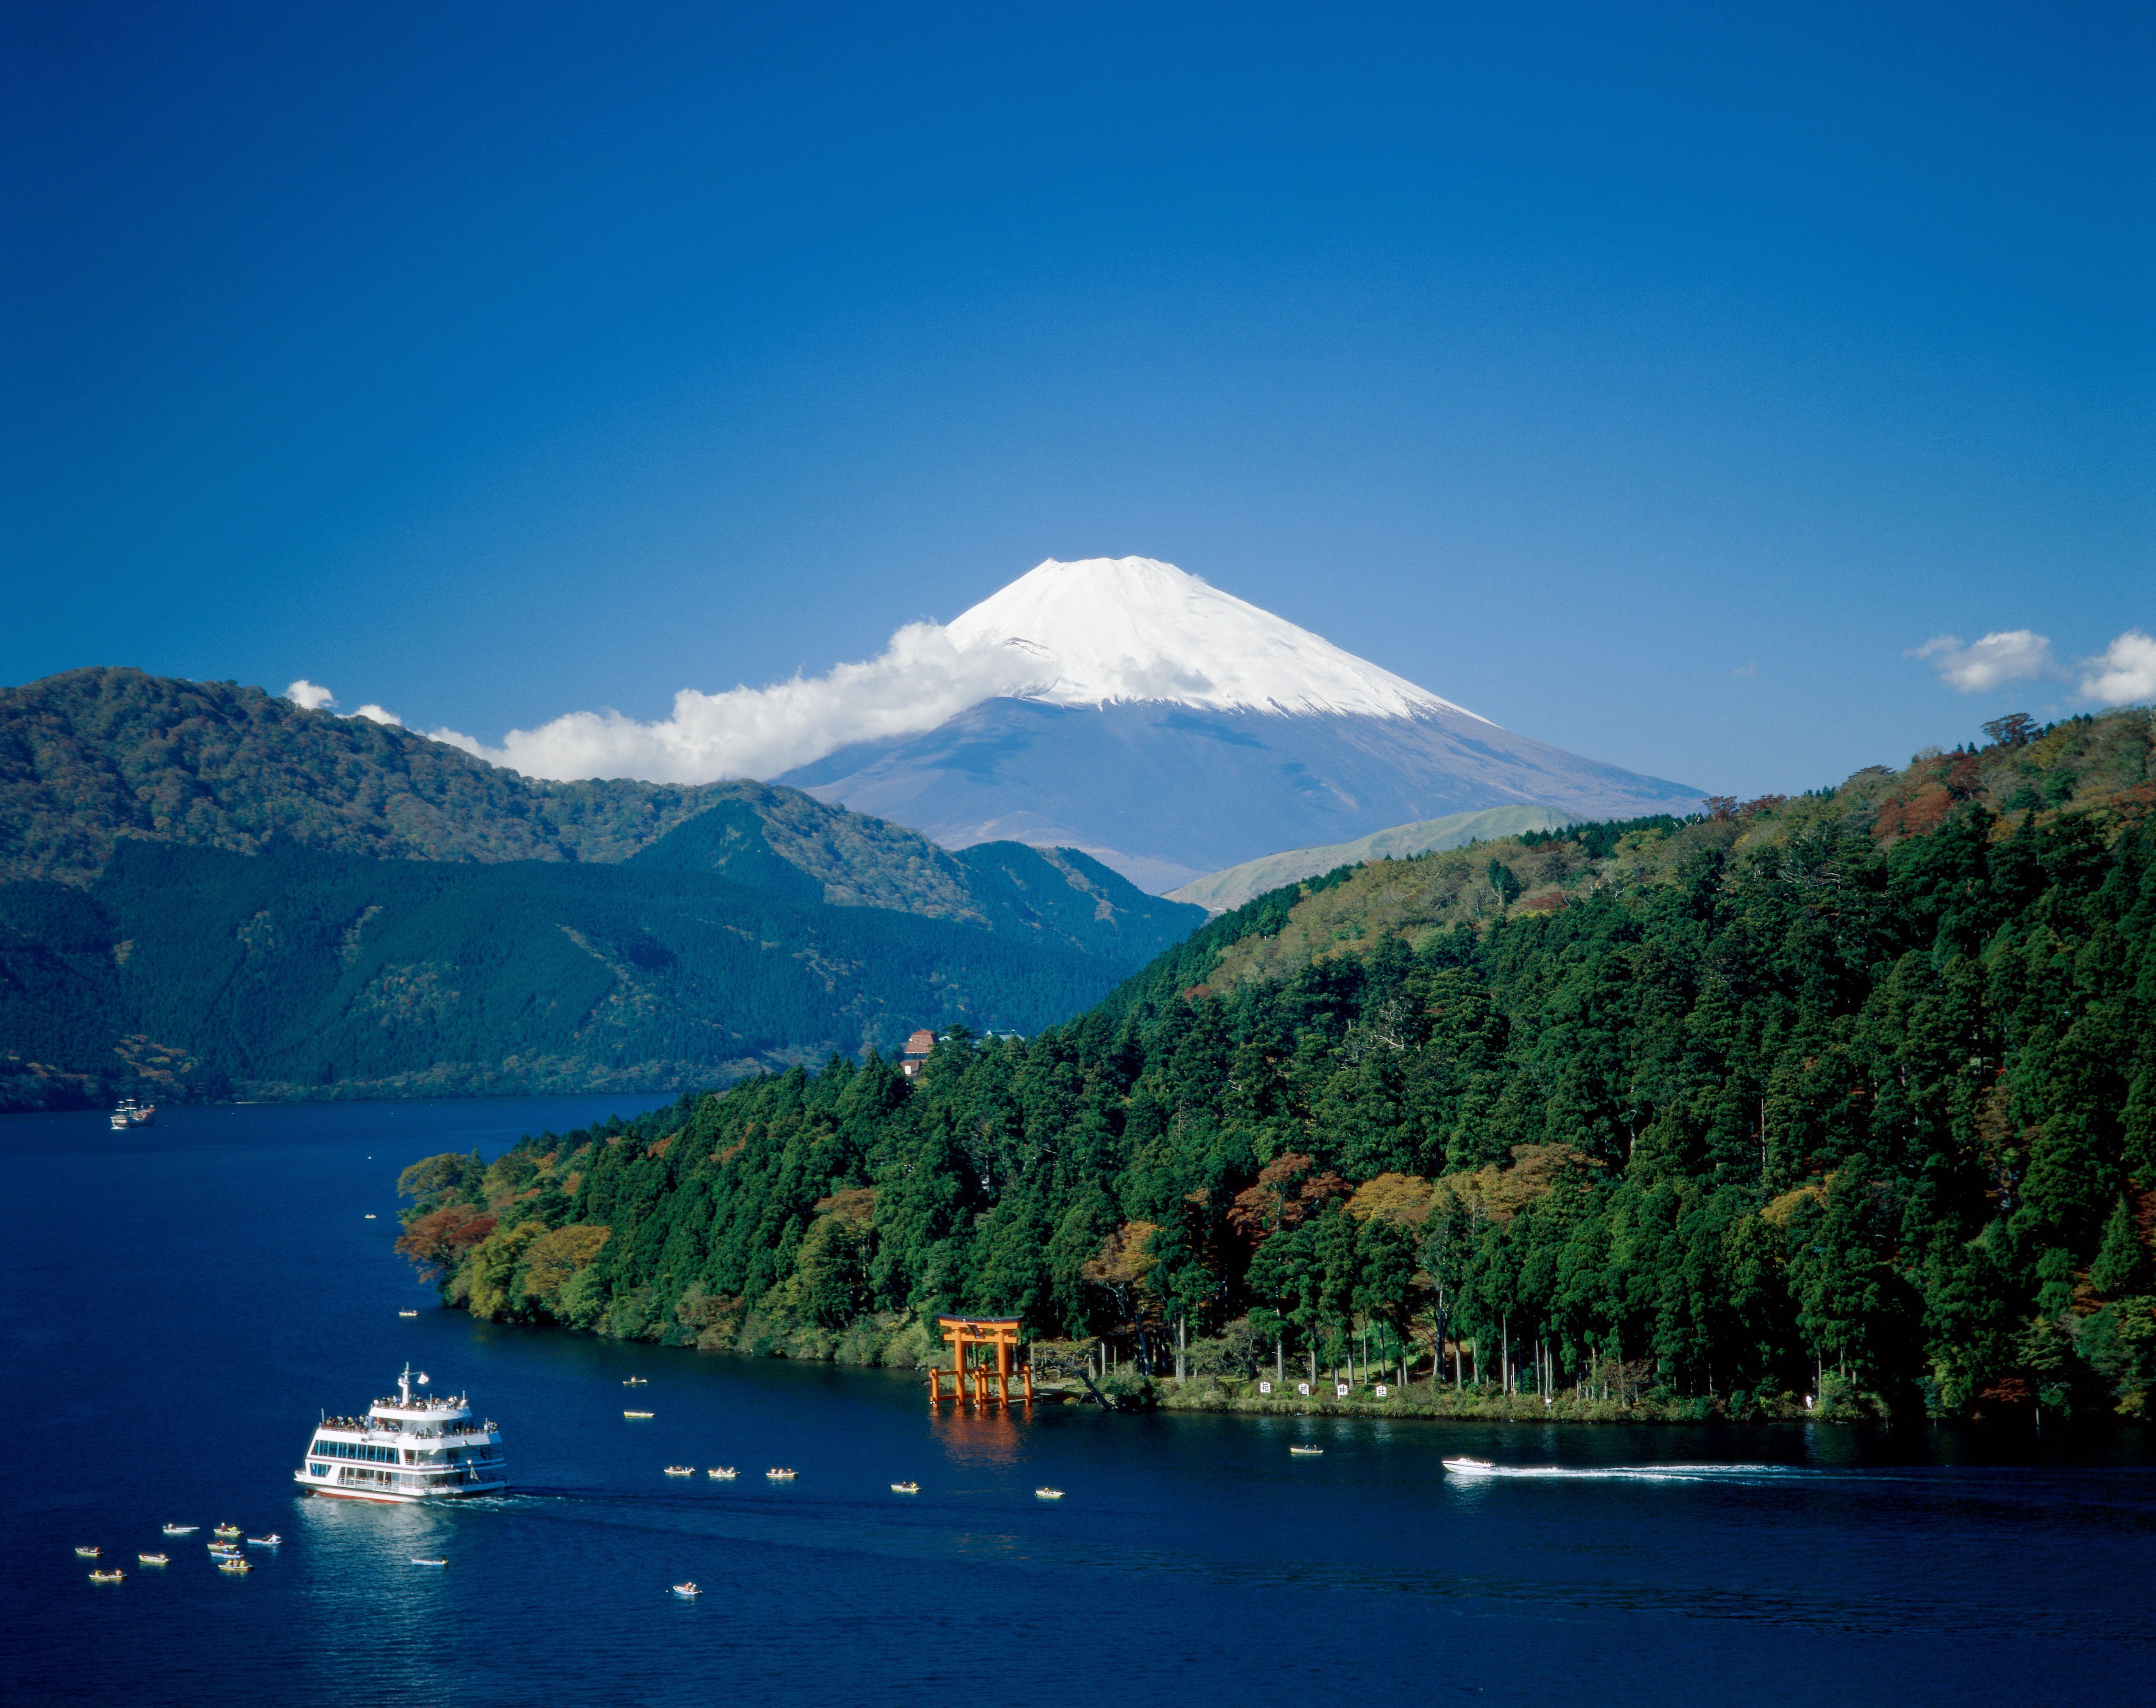 Cruises to far-flung destinations like Japan are increasingly popular